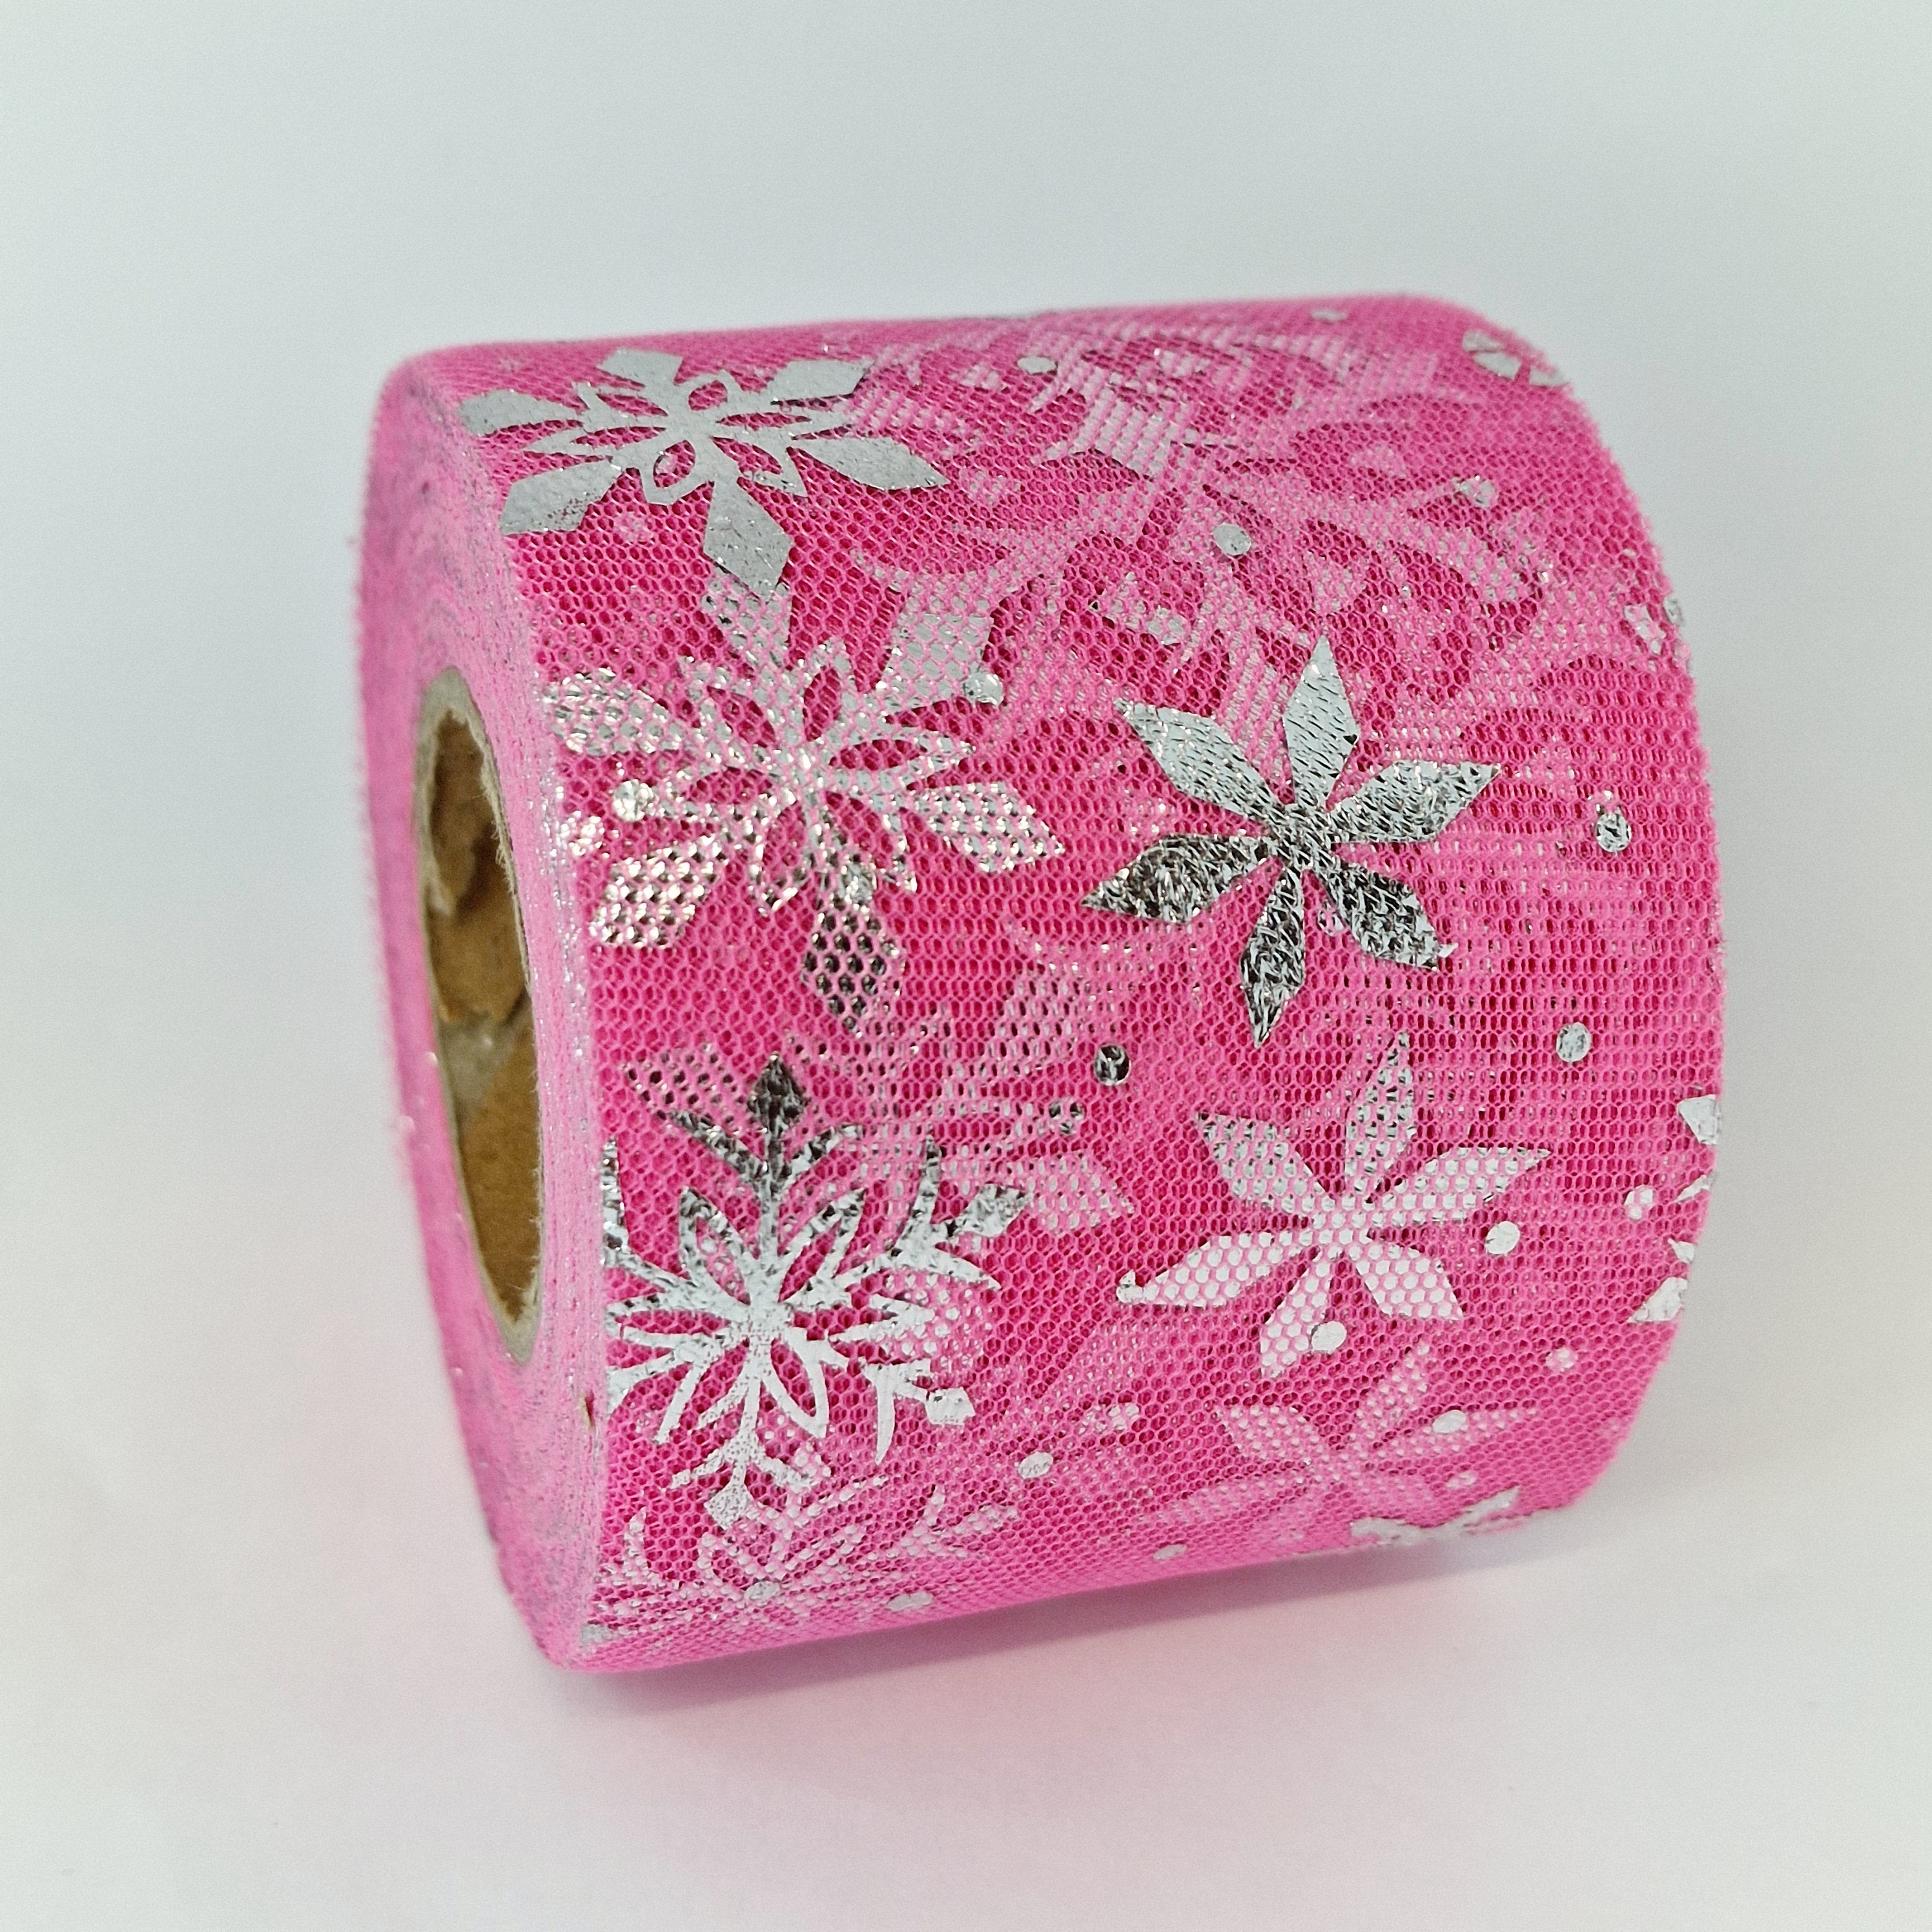 MajorCrafts 60mm 22metres Rose Pink with Silver Snowflakes Tulle Mesh Ribbon